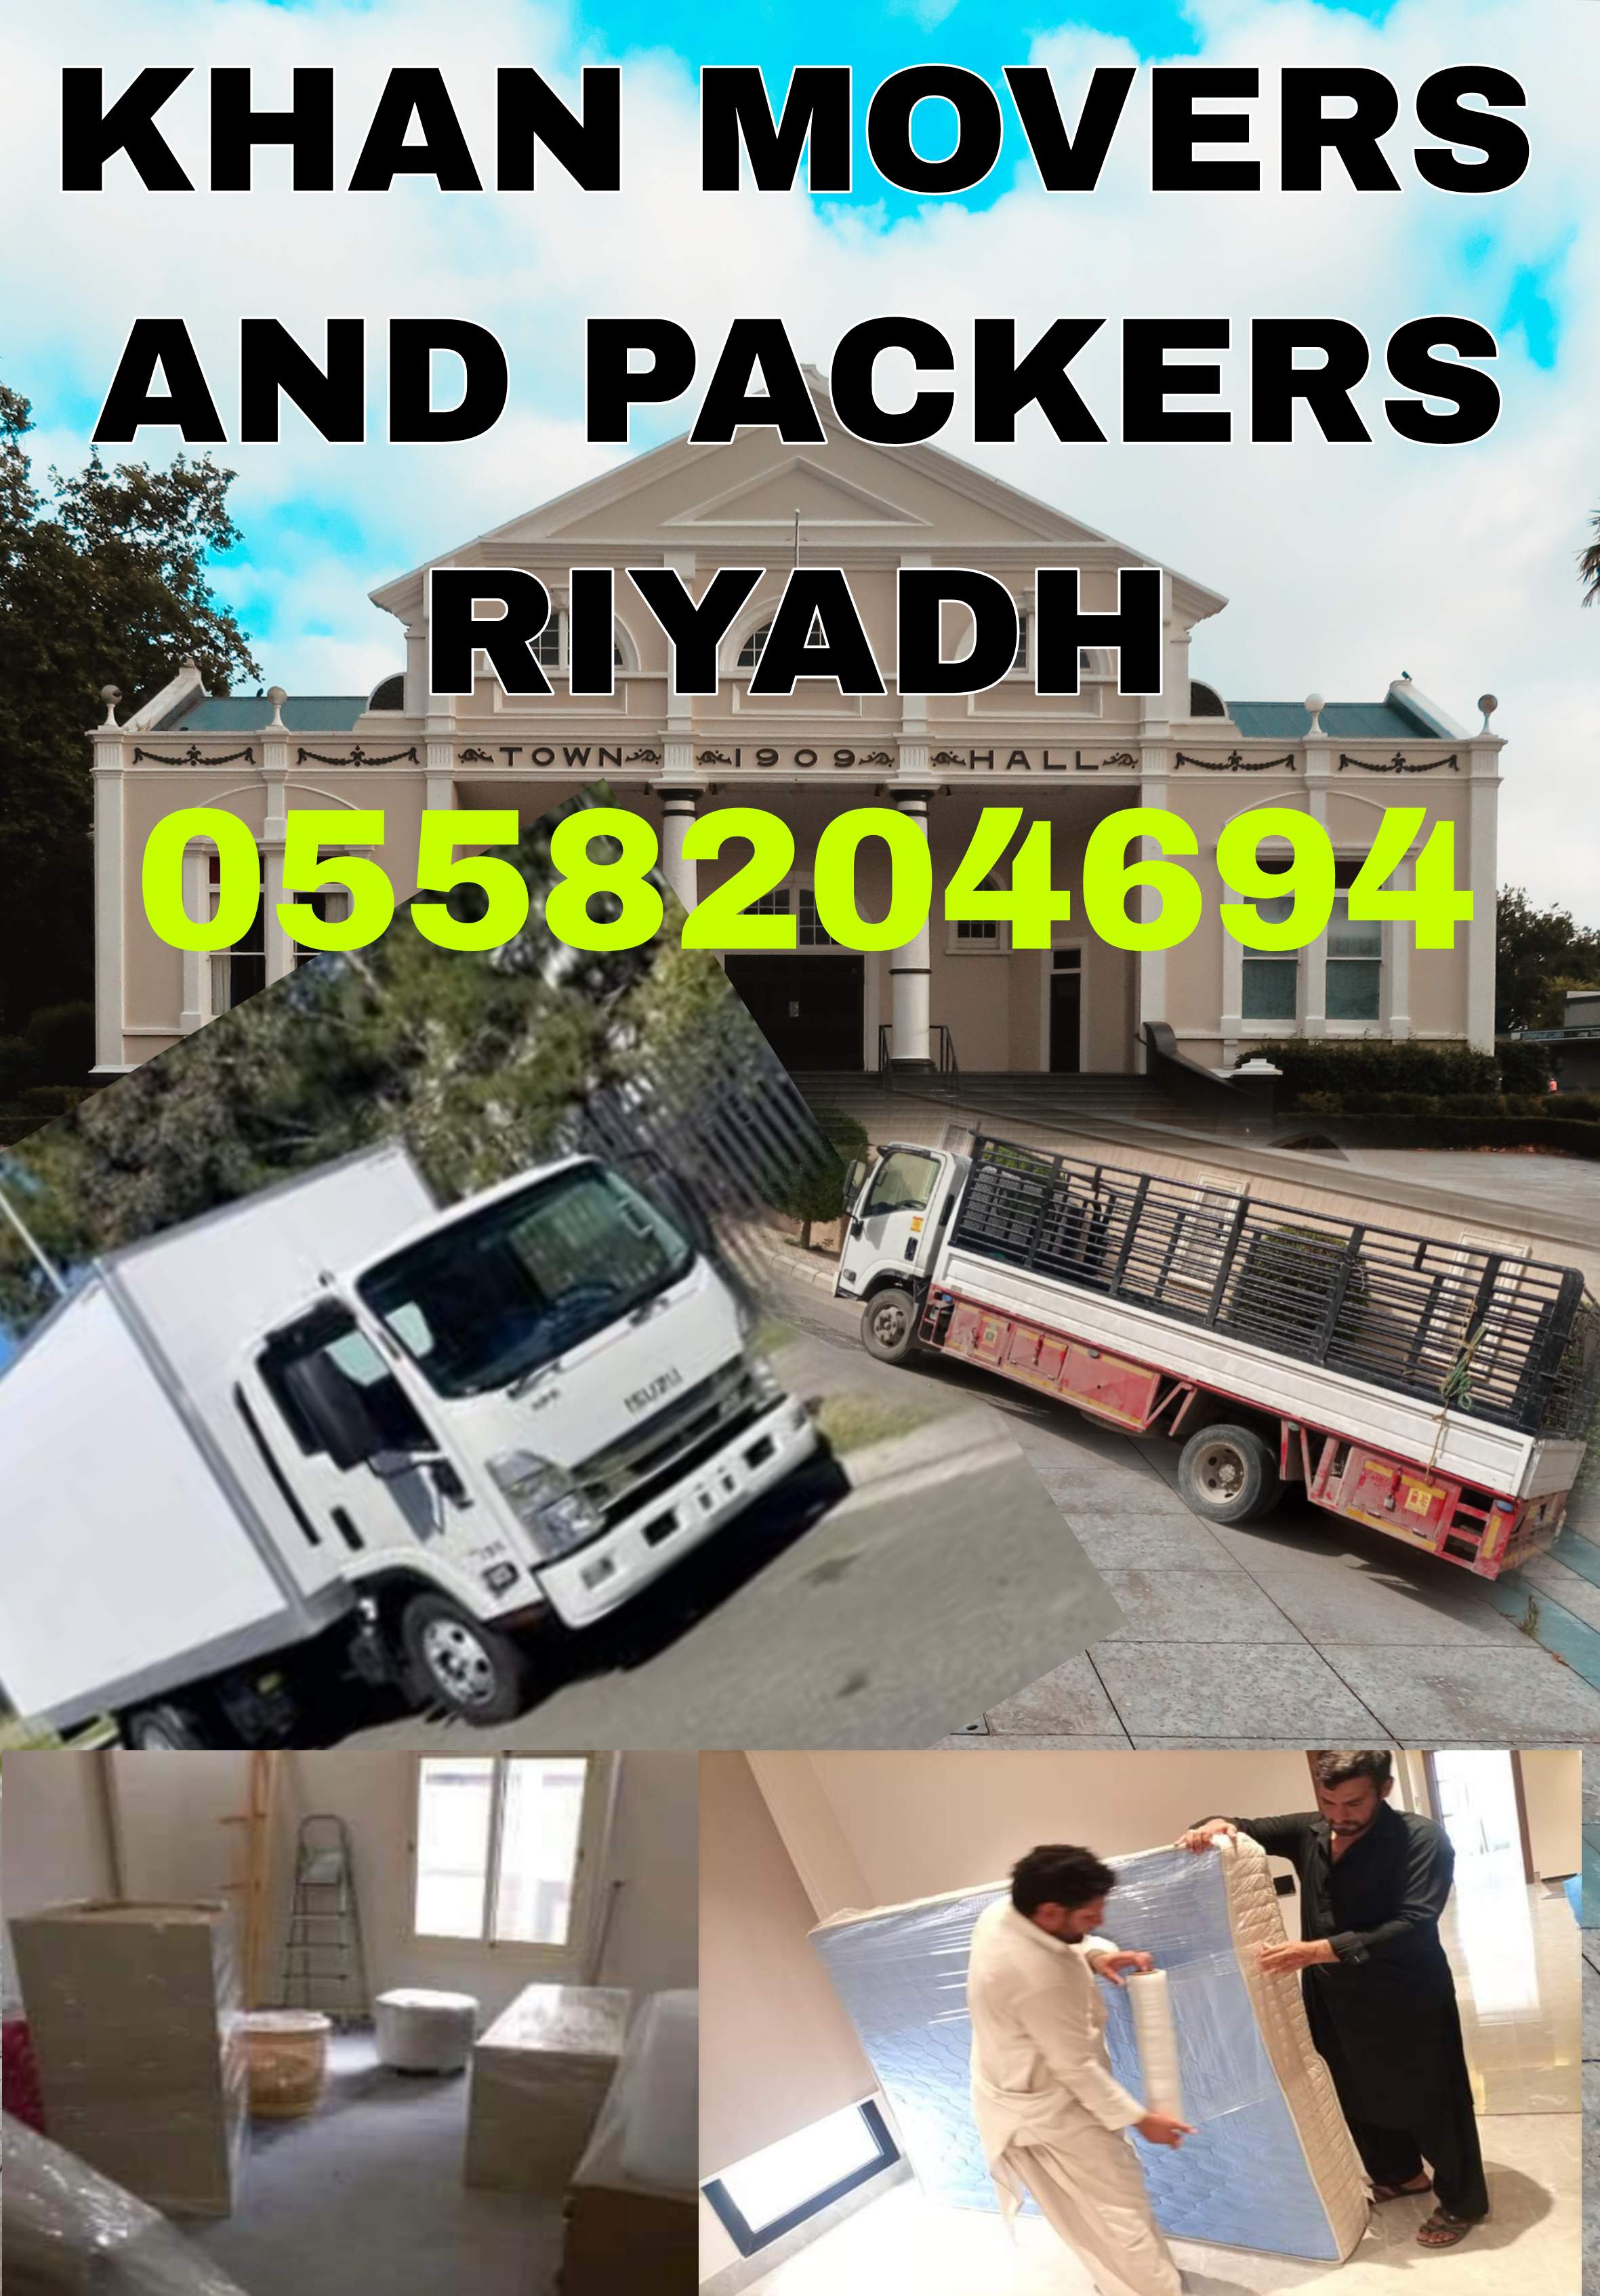 MOVERS AND PACKERS RIYADH